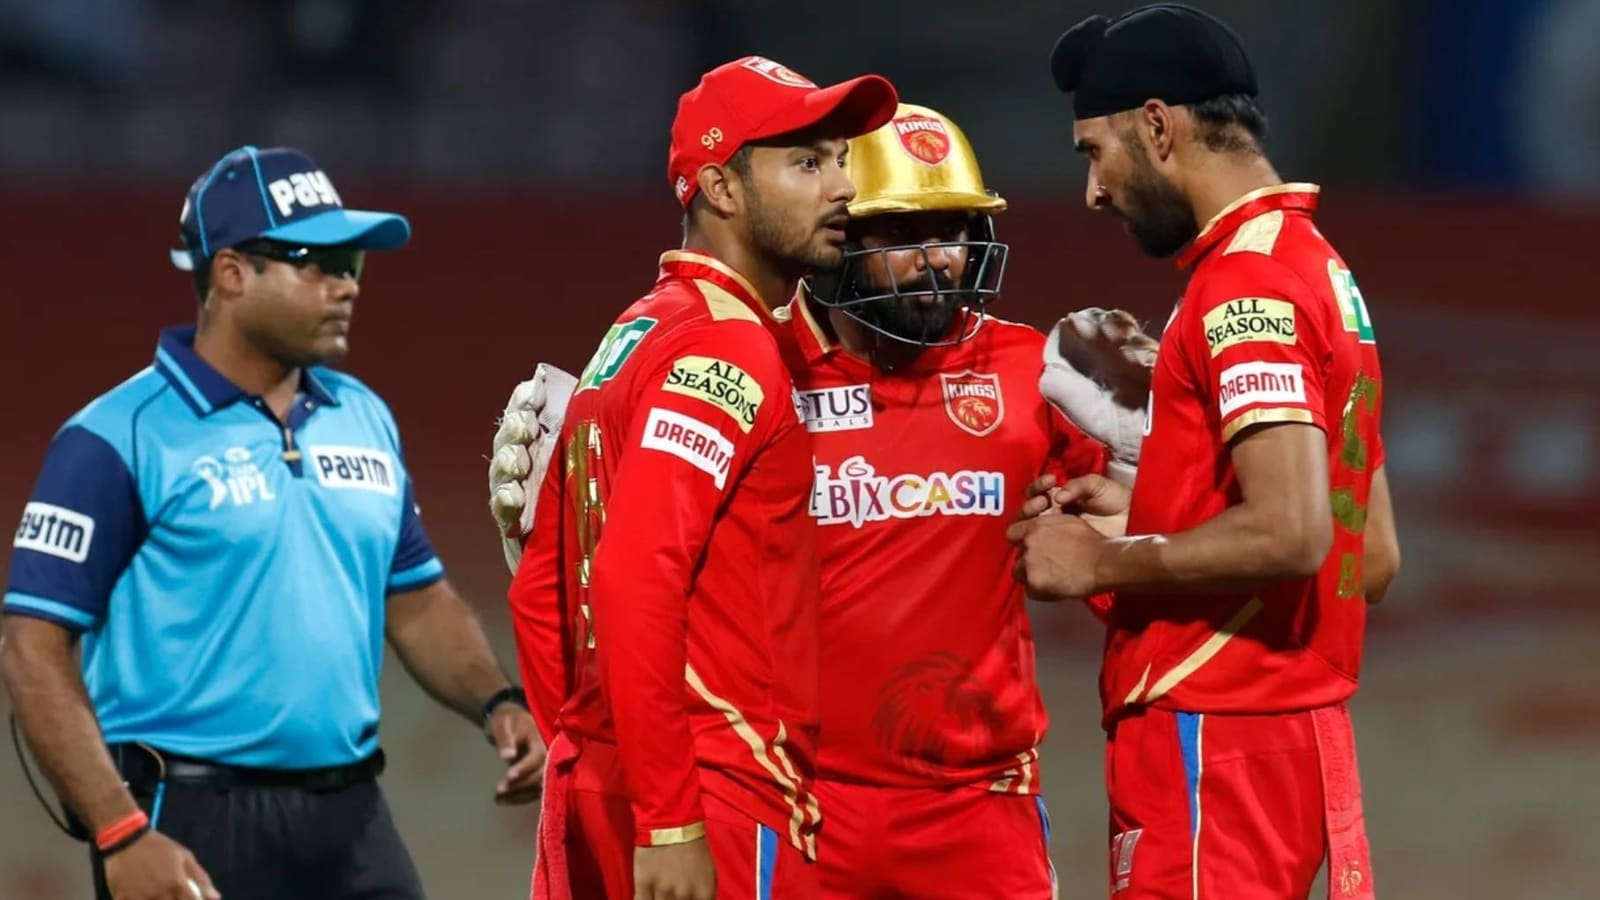 PBKS Vs RR IPL 2022 Match 52: Full Preview, Probable XIs, Pitch Report, And Dream11 Team Prediction | SportzPoint.com